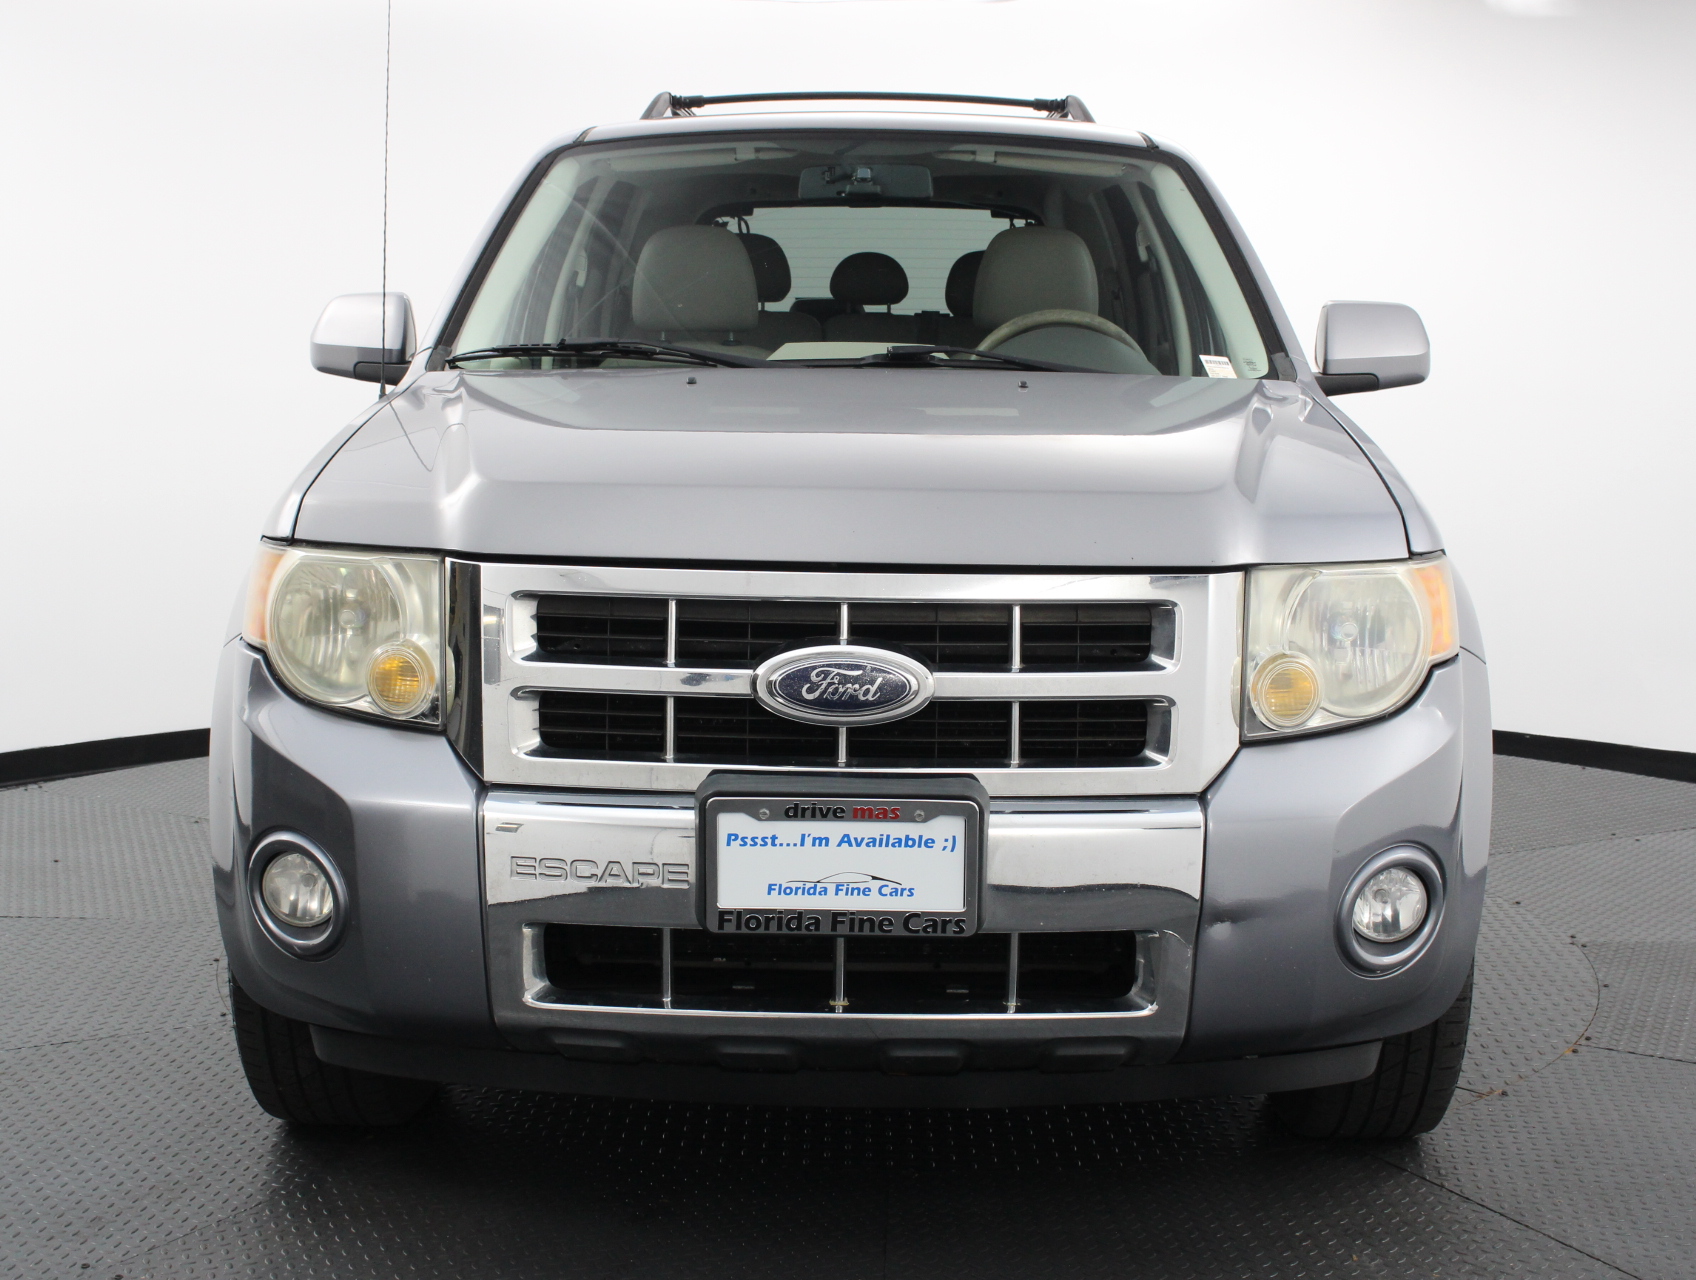 Florida Fine Cars - Used FORD ESCAPE 2008 WEST PALM SELECT TRIM